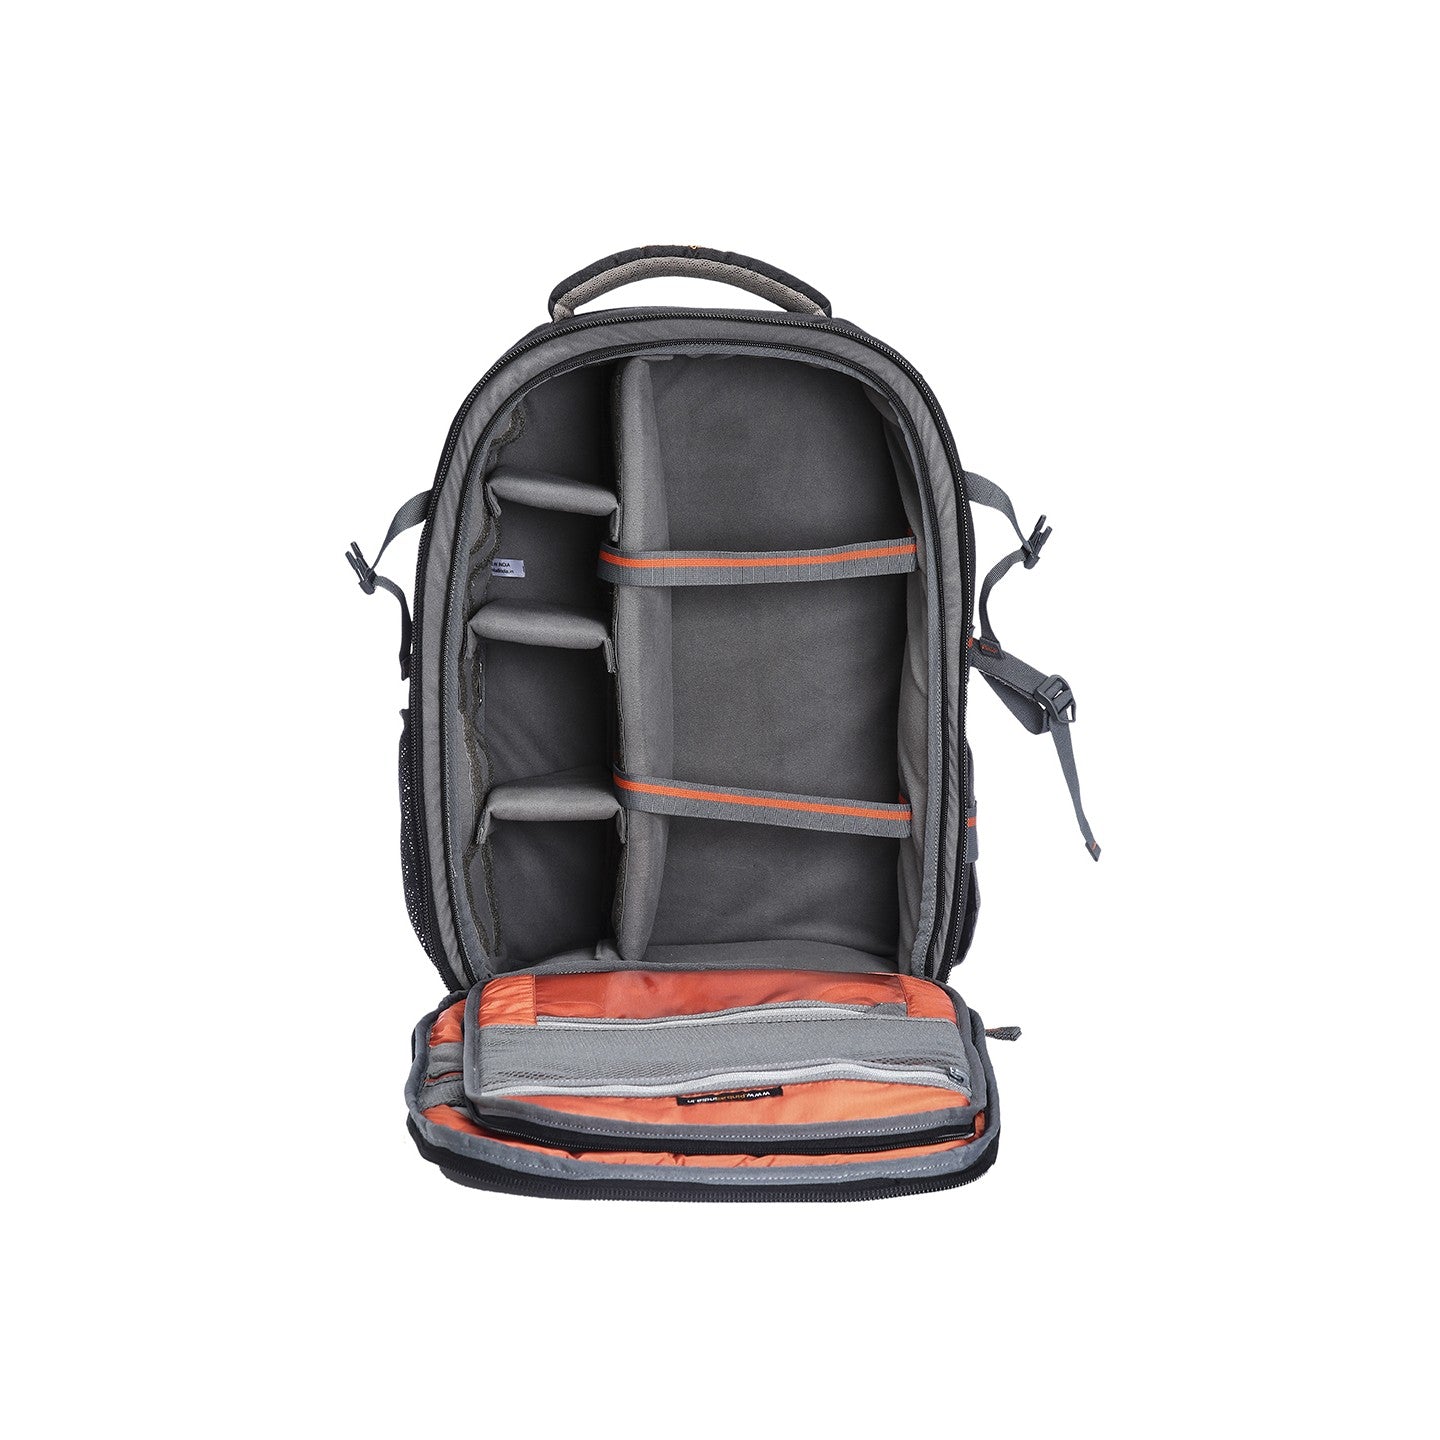 Image: Open view of the P37 Torino 2 video camera bag, showcasing its empty compartments and customizable dividers. The bag's spacious interior provides ample storage space for video cameras, lenses, accessories, and other equipment. Stay organized and ready for your next video shoot with the versatile storage capabilities of the P37 Torino 2.